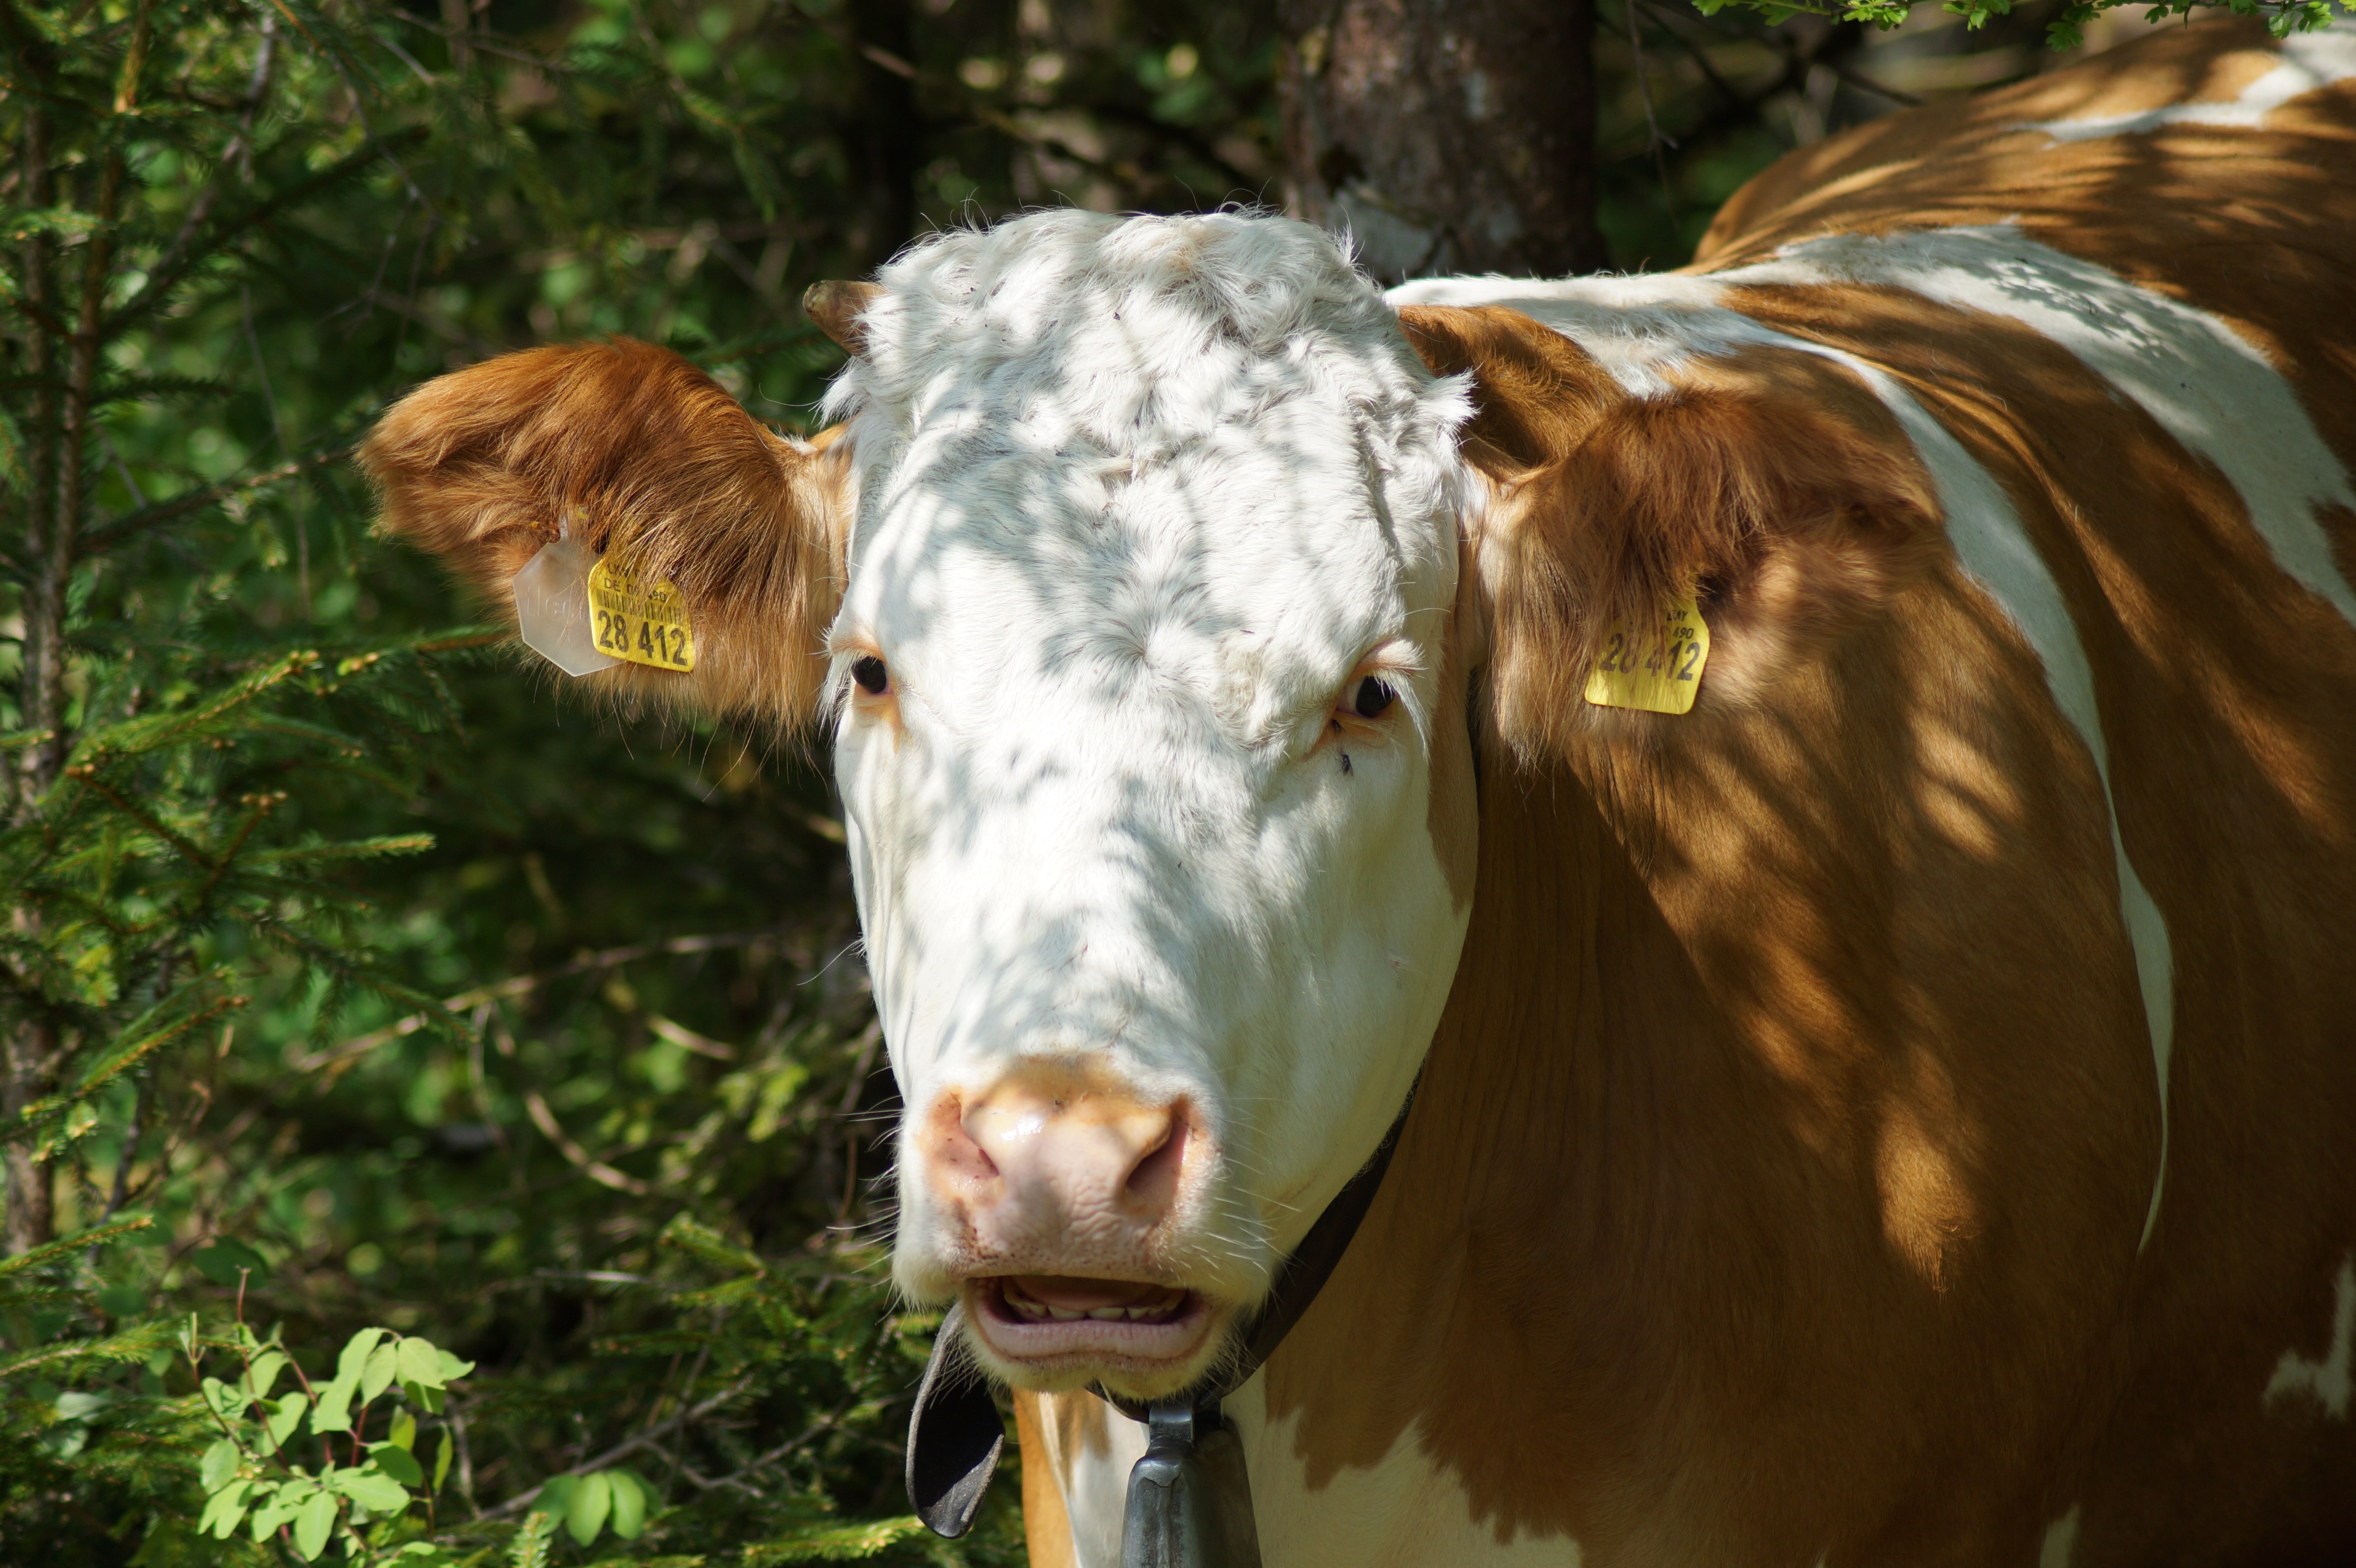 brown and white coated cow surrounded with green plant leaf during day time